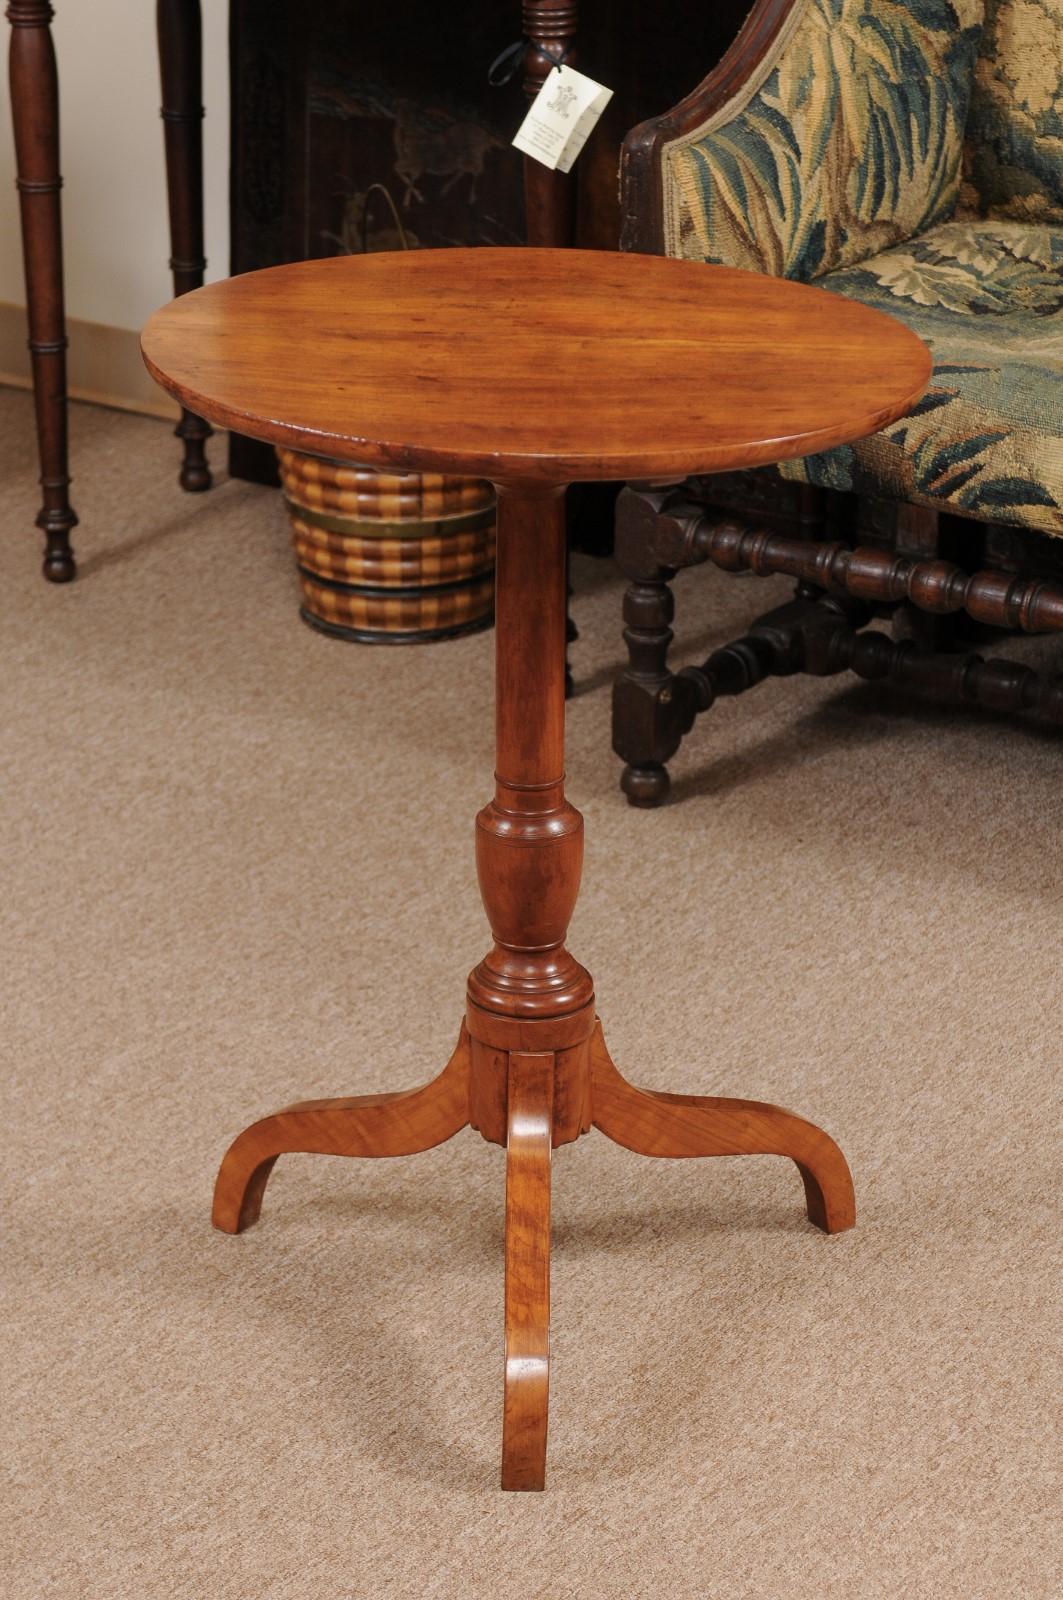 Pennsylvania Federal Style Applewood Candle Stand, 19th Century 5